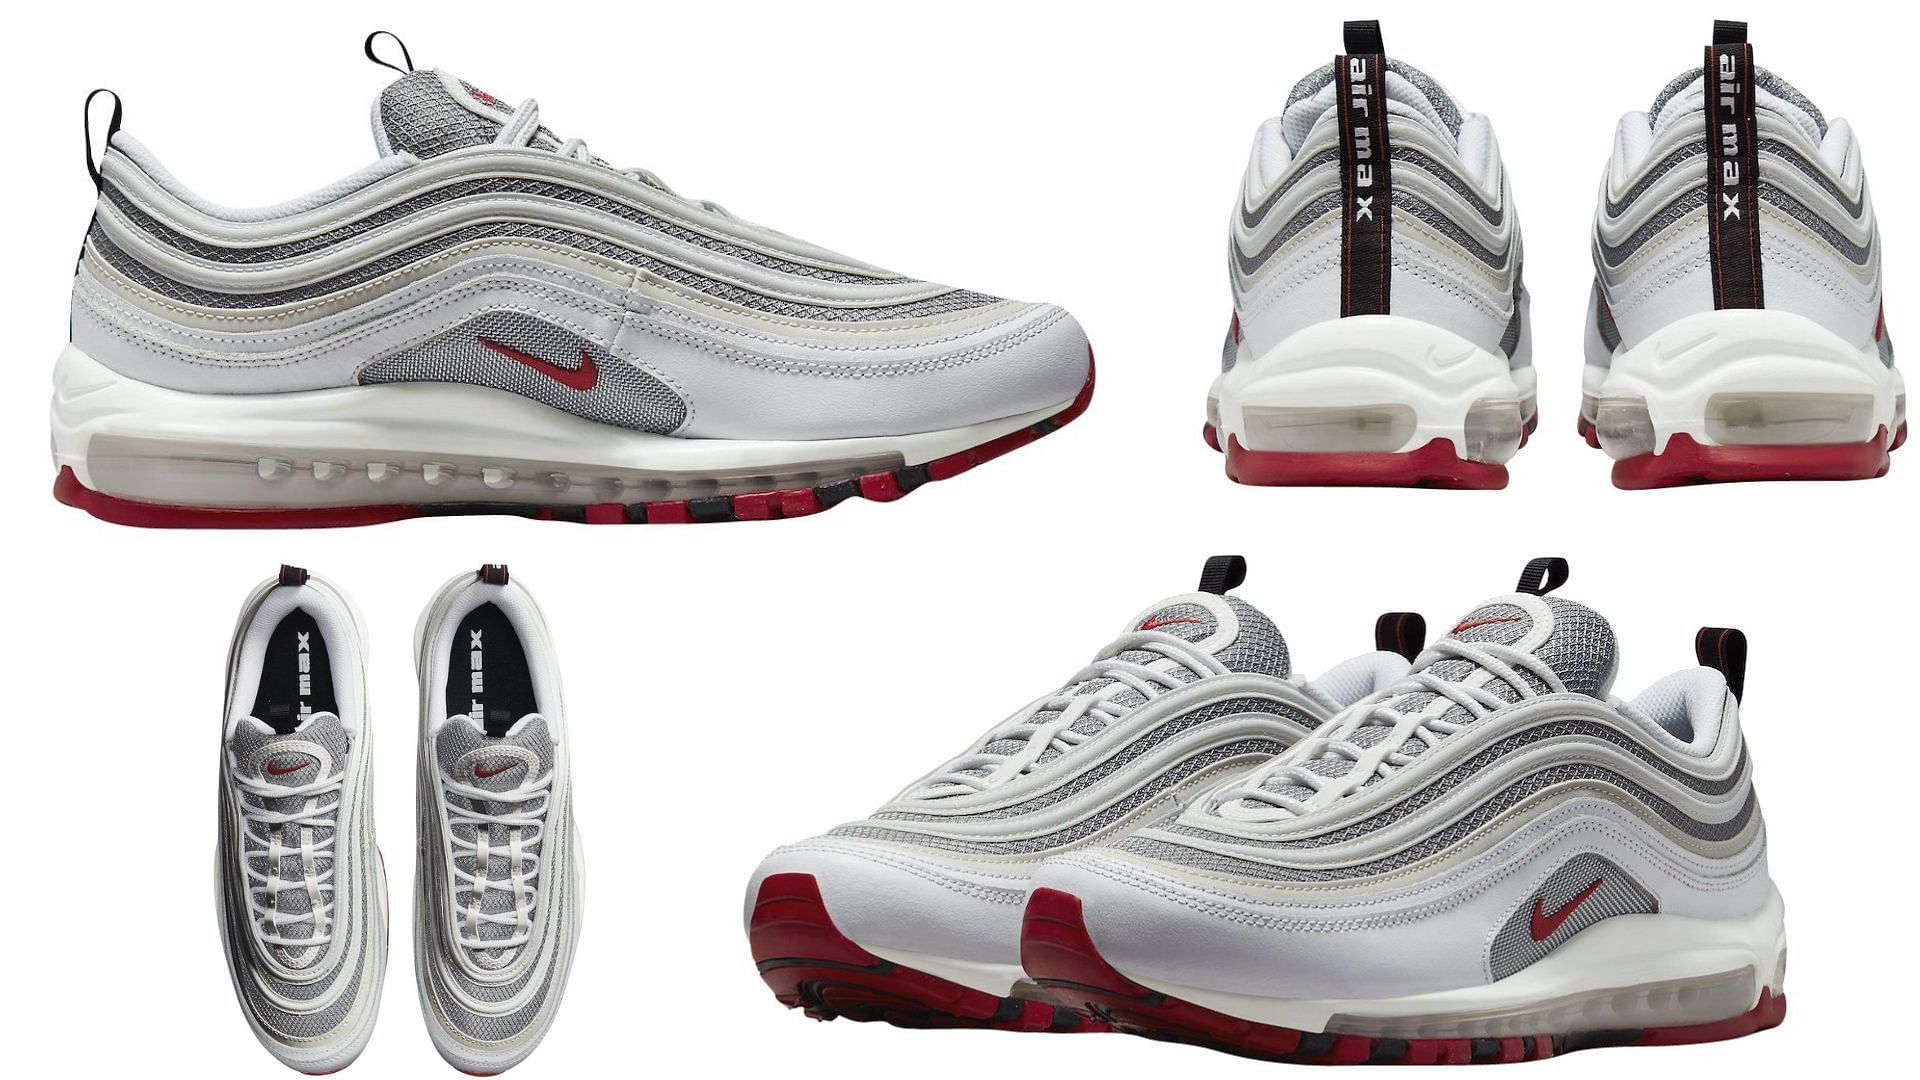 Take a closer look at the White Bullet colorway (Image via Sportskeeda)